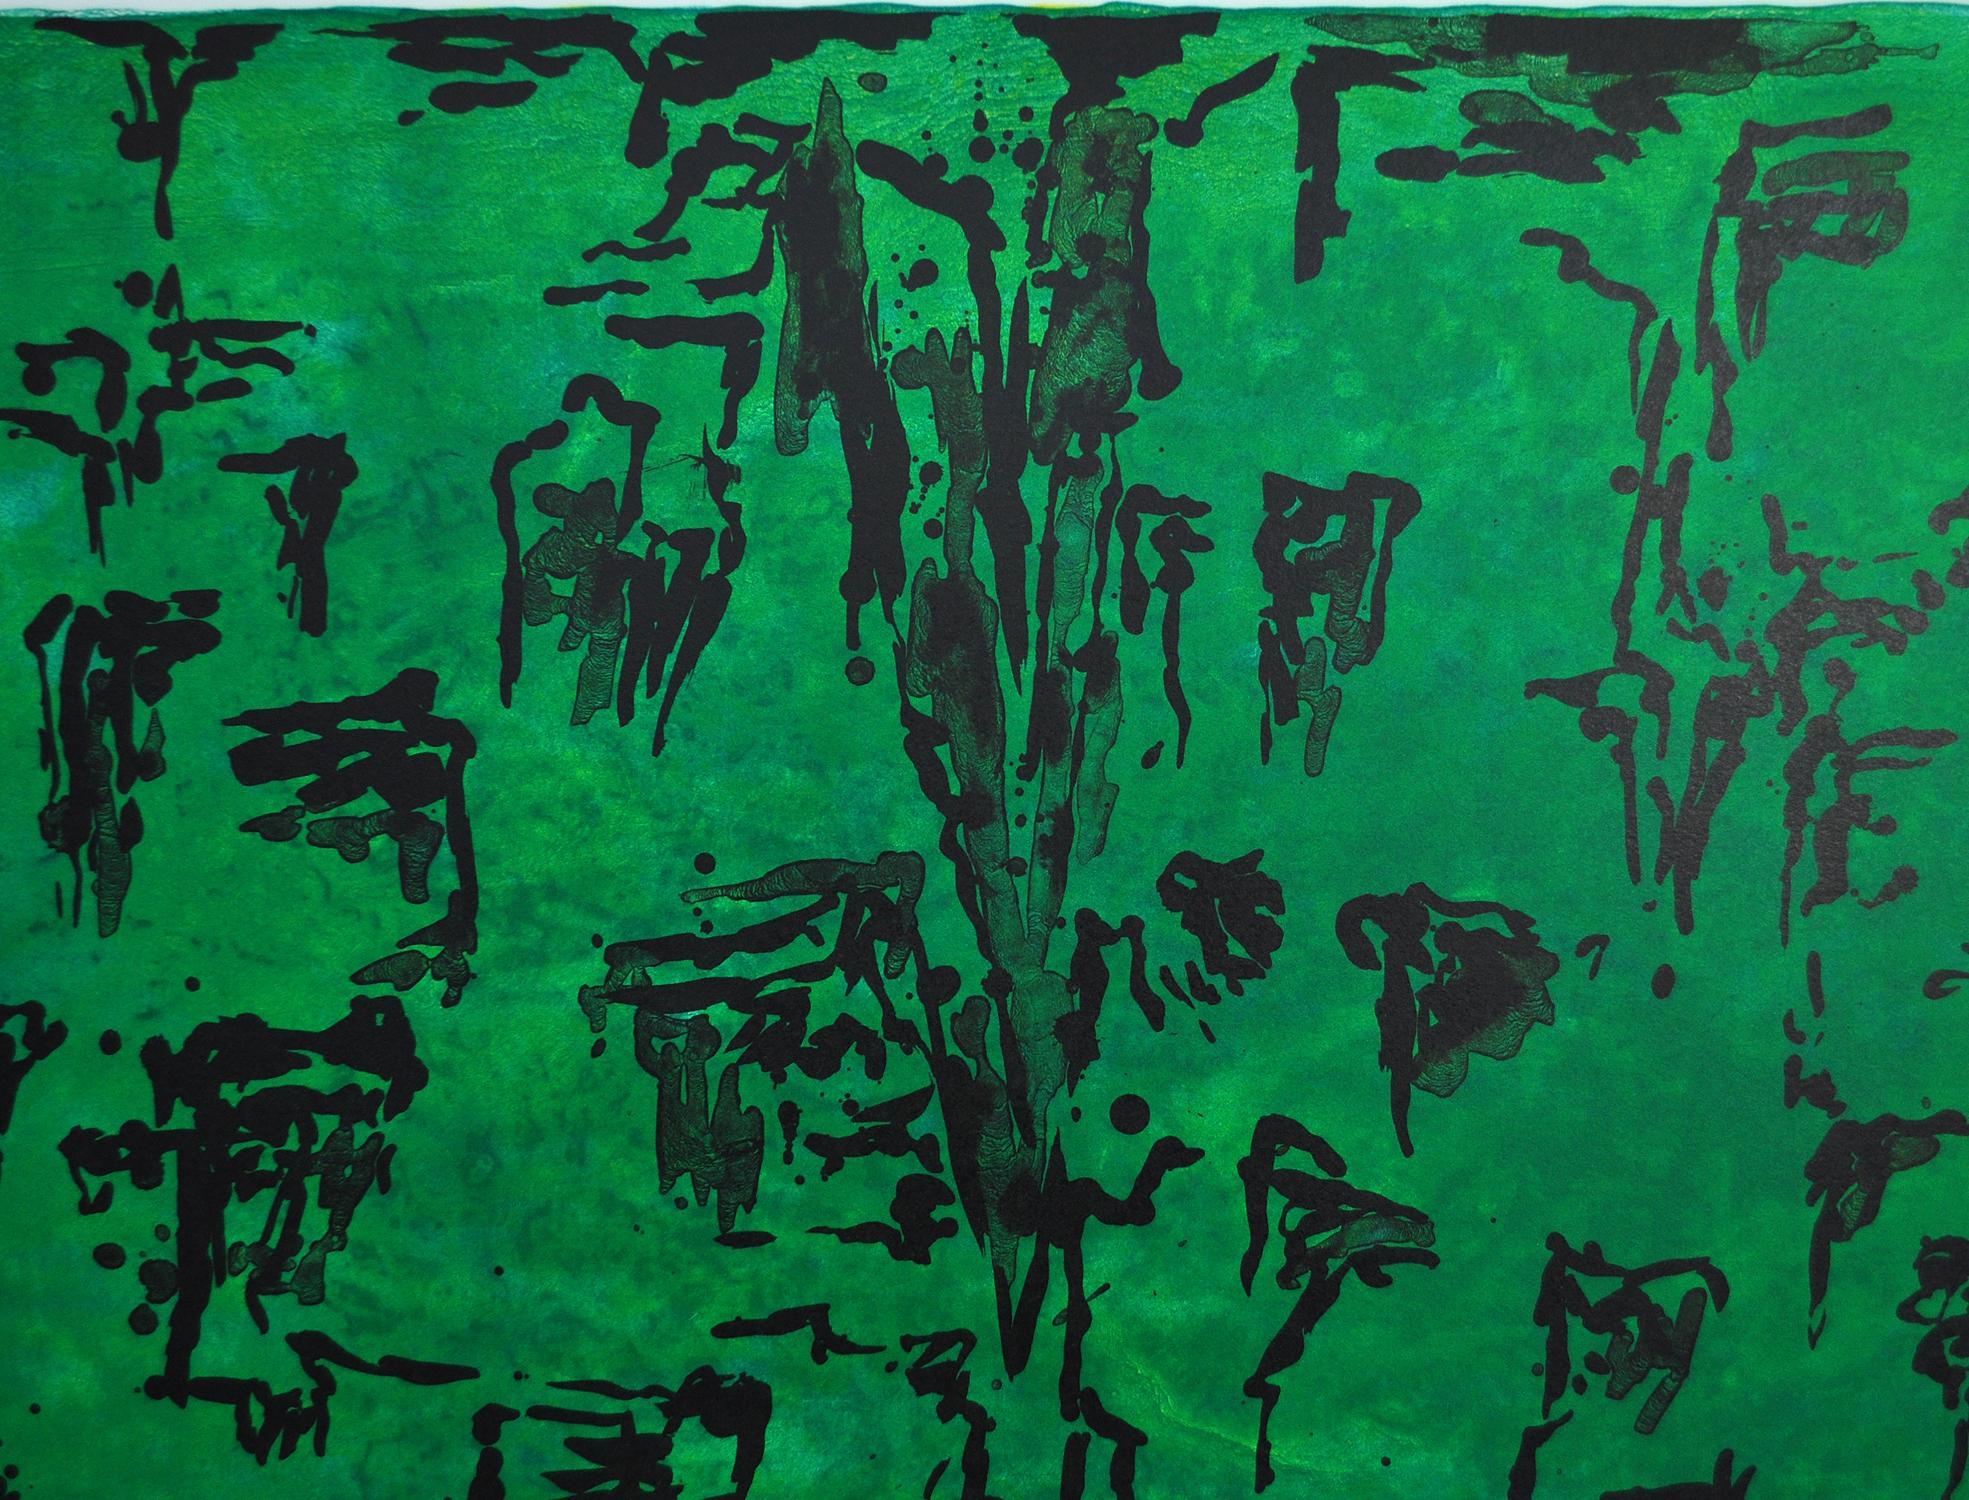 Lithograph by Tróndur Patursson. Green and dark colors with his ongoing theme of nature and ocean.  Signed and numbered H.C 1/15, 2003.

Art size:
Width: 70 cm x height: 50 cm.
Unframed

Tróndur Patursson (born 1 March 1944 in Kirkjubøur) is a